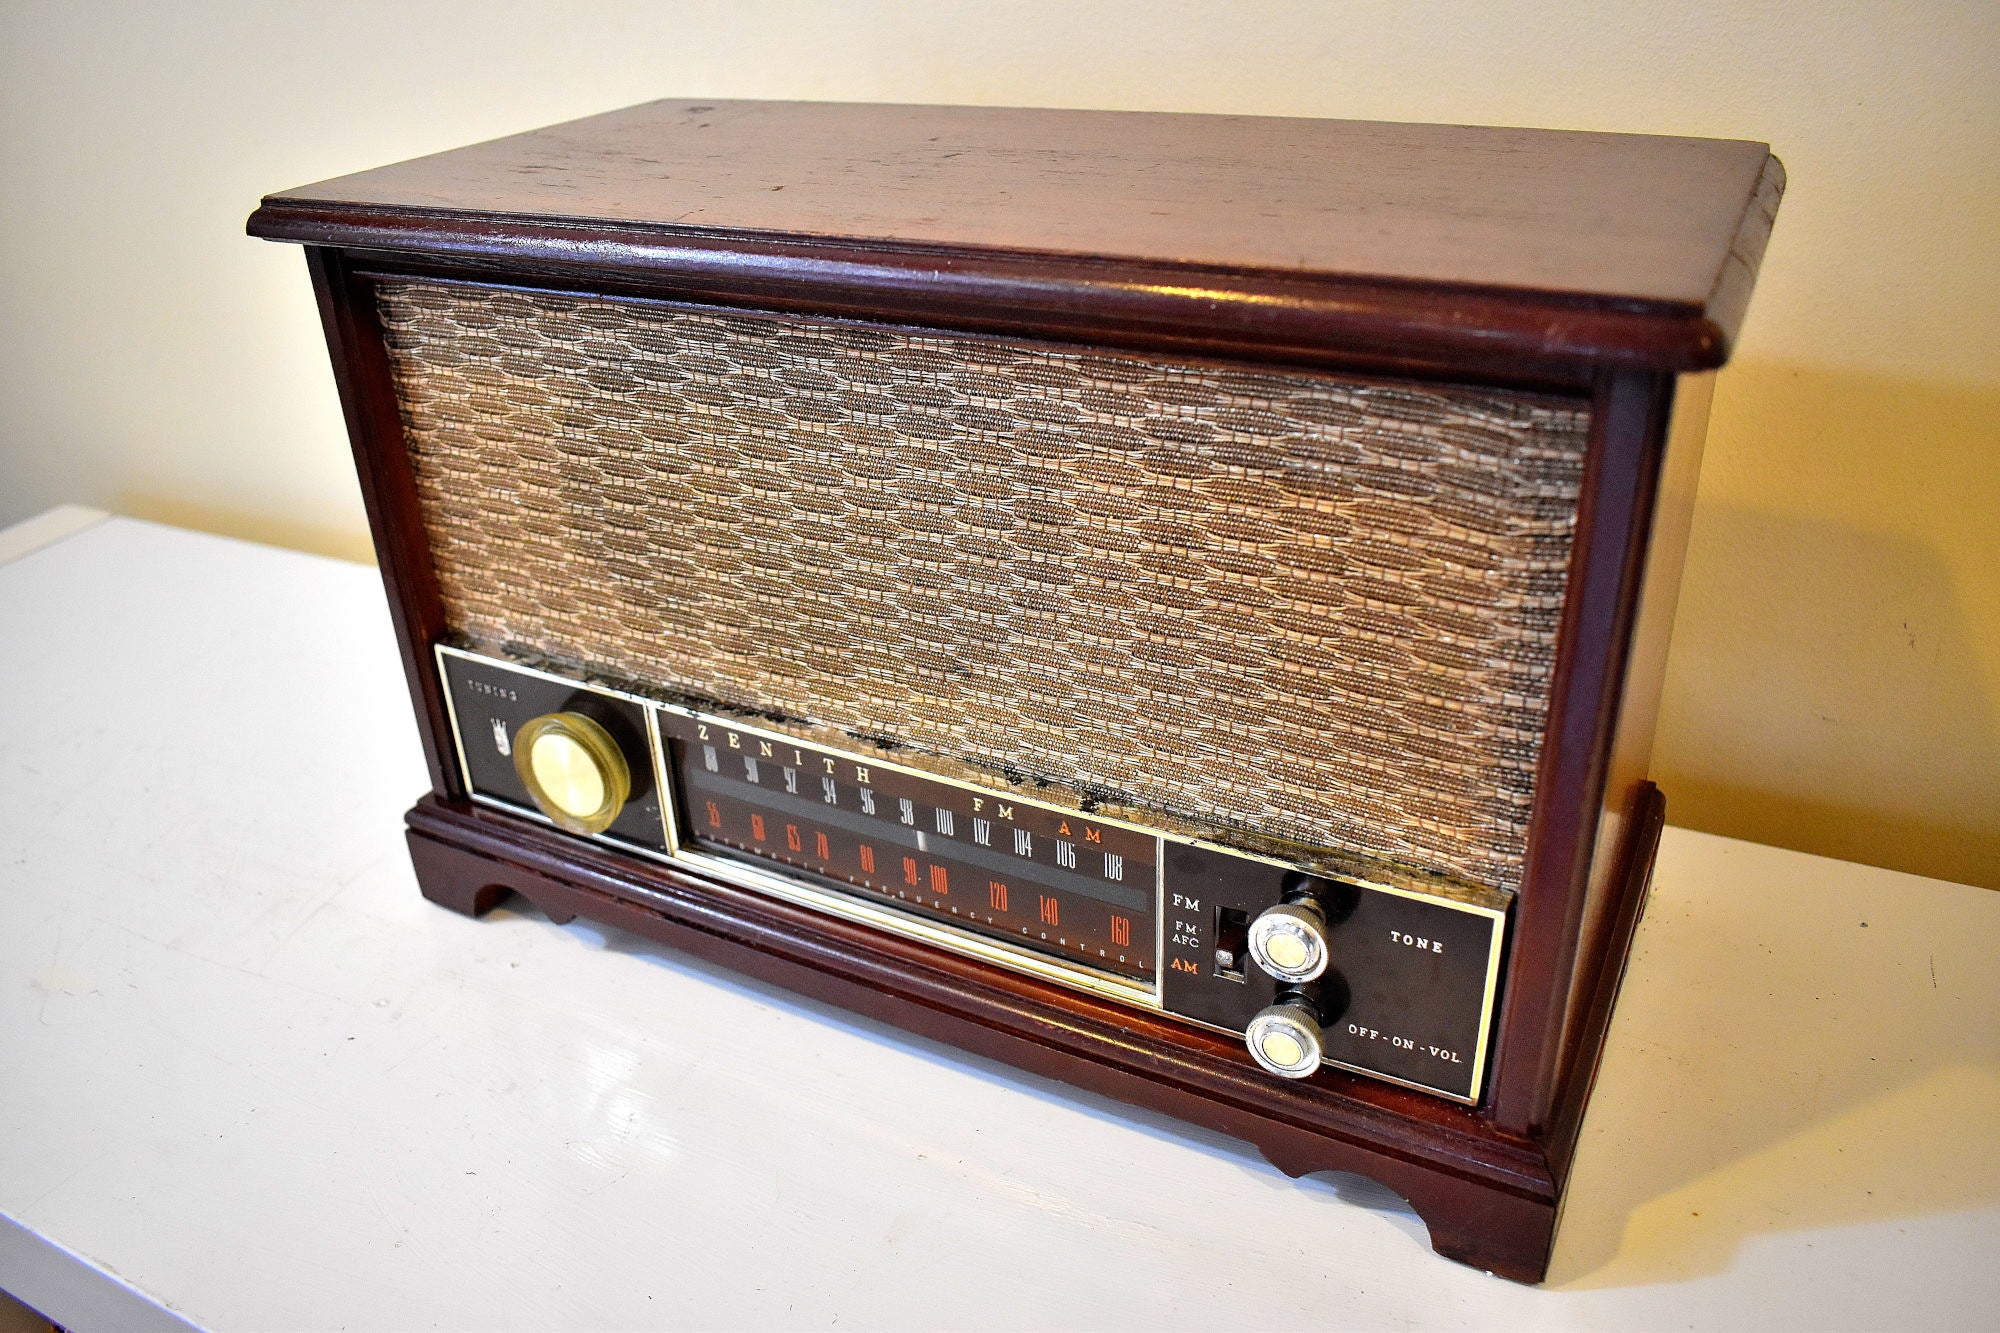 Fine Solid Wood Cabinetry Mid Century 1959 Zenith Model K731 AM FM Vacuum Tube Radio Excellent Condition Stellar Sounding!